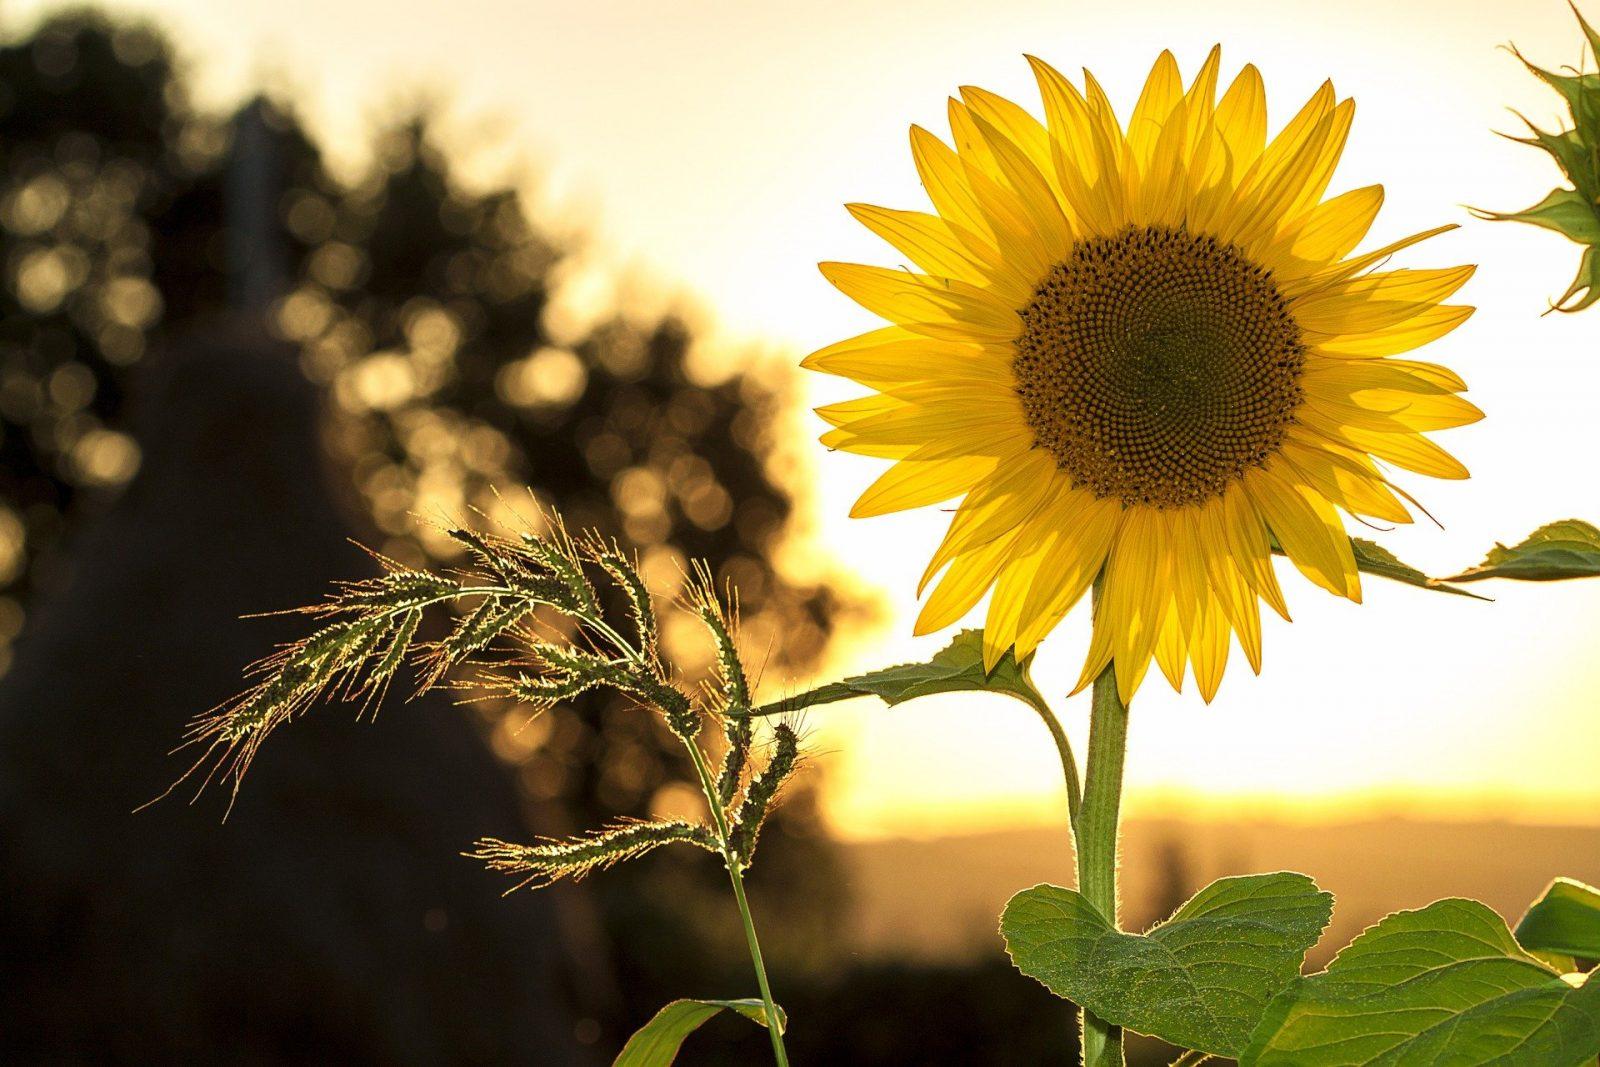 Sunflower in front of Sun